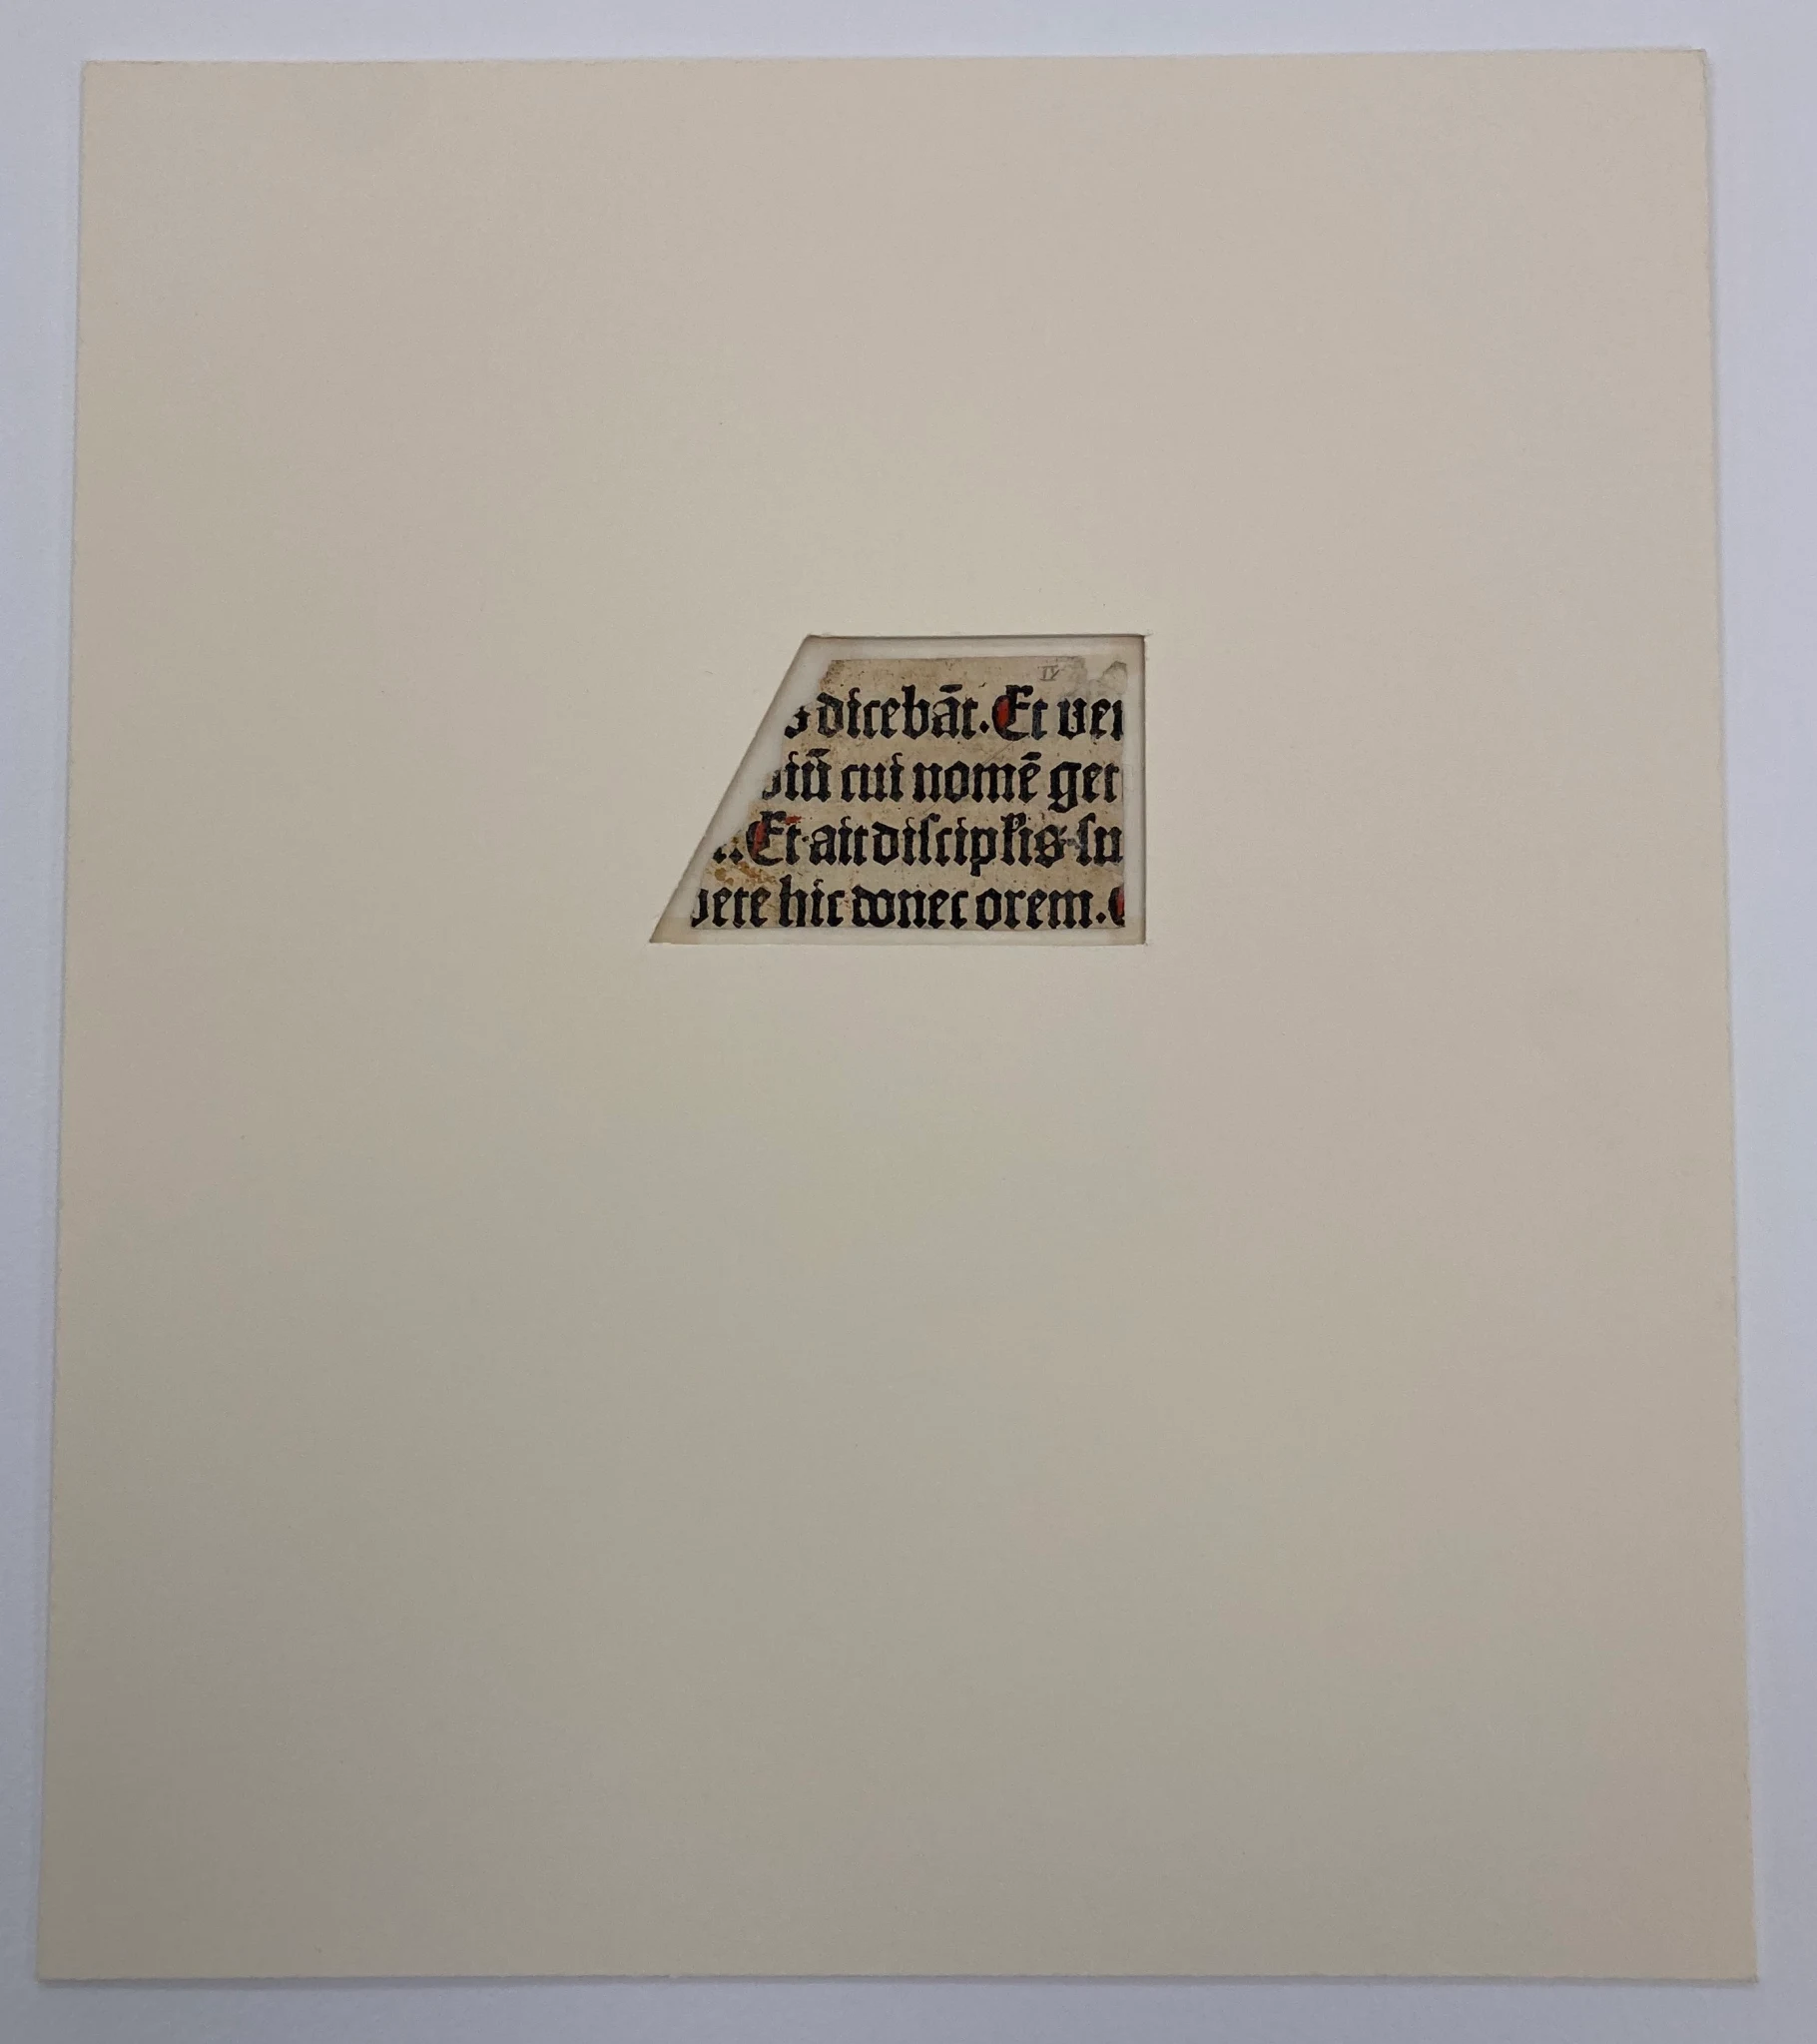 A photography by Erik Kwakkel of a manuscript fragment bound in the center of a large canvas. It shows where the rest of the manuscript likely was and how much of the sheet that’s been lost to time.